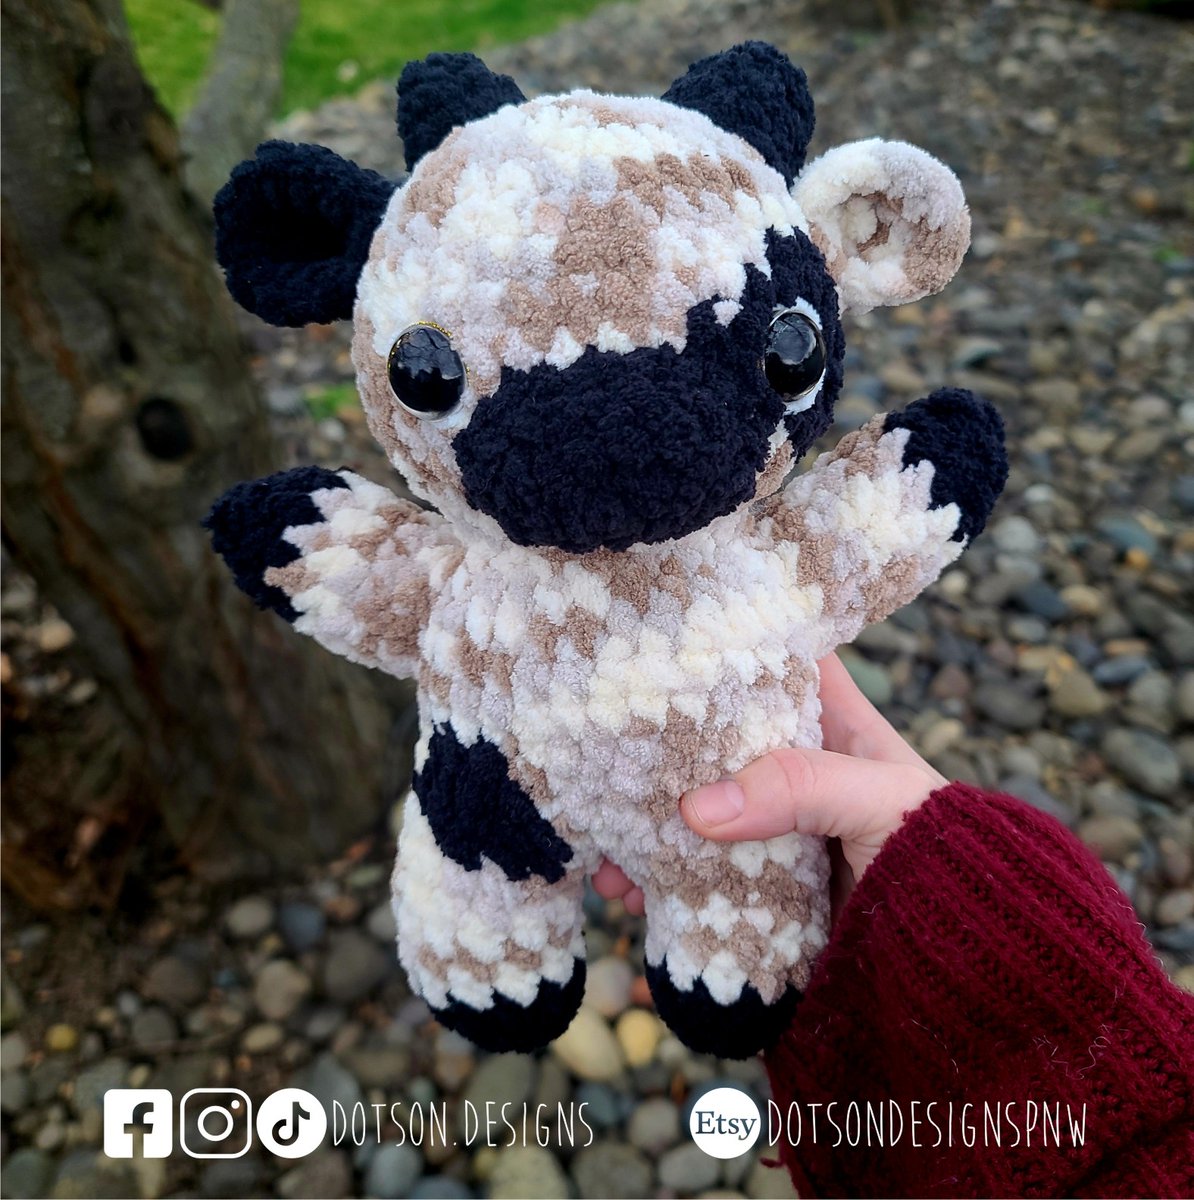 Another cow made for market ❤️ 🐄 🐮 

Pattern by kosinsqa.handmade on Instagram 

#crocheting #crochet #crochetaddict #crochetpattern #crochetlove #cows #cow #amigurumiplush #amigurumi #plushie #handmade #pattern #freeamigurumipatterns #freecrochetpattern #freecrochetpattern